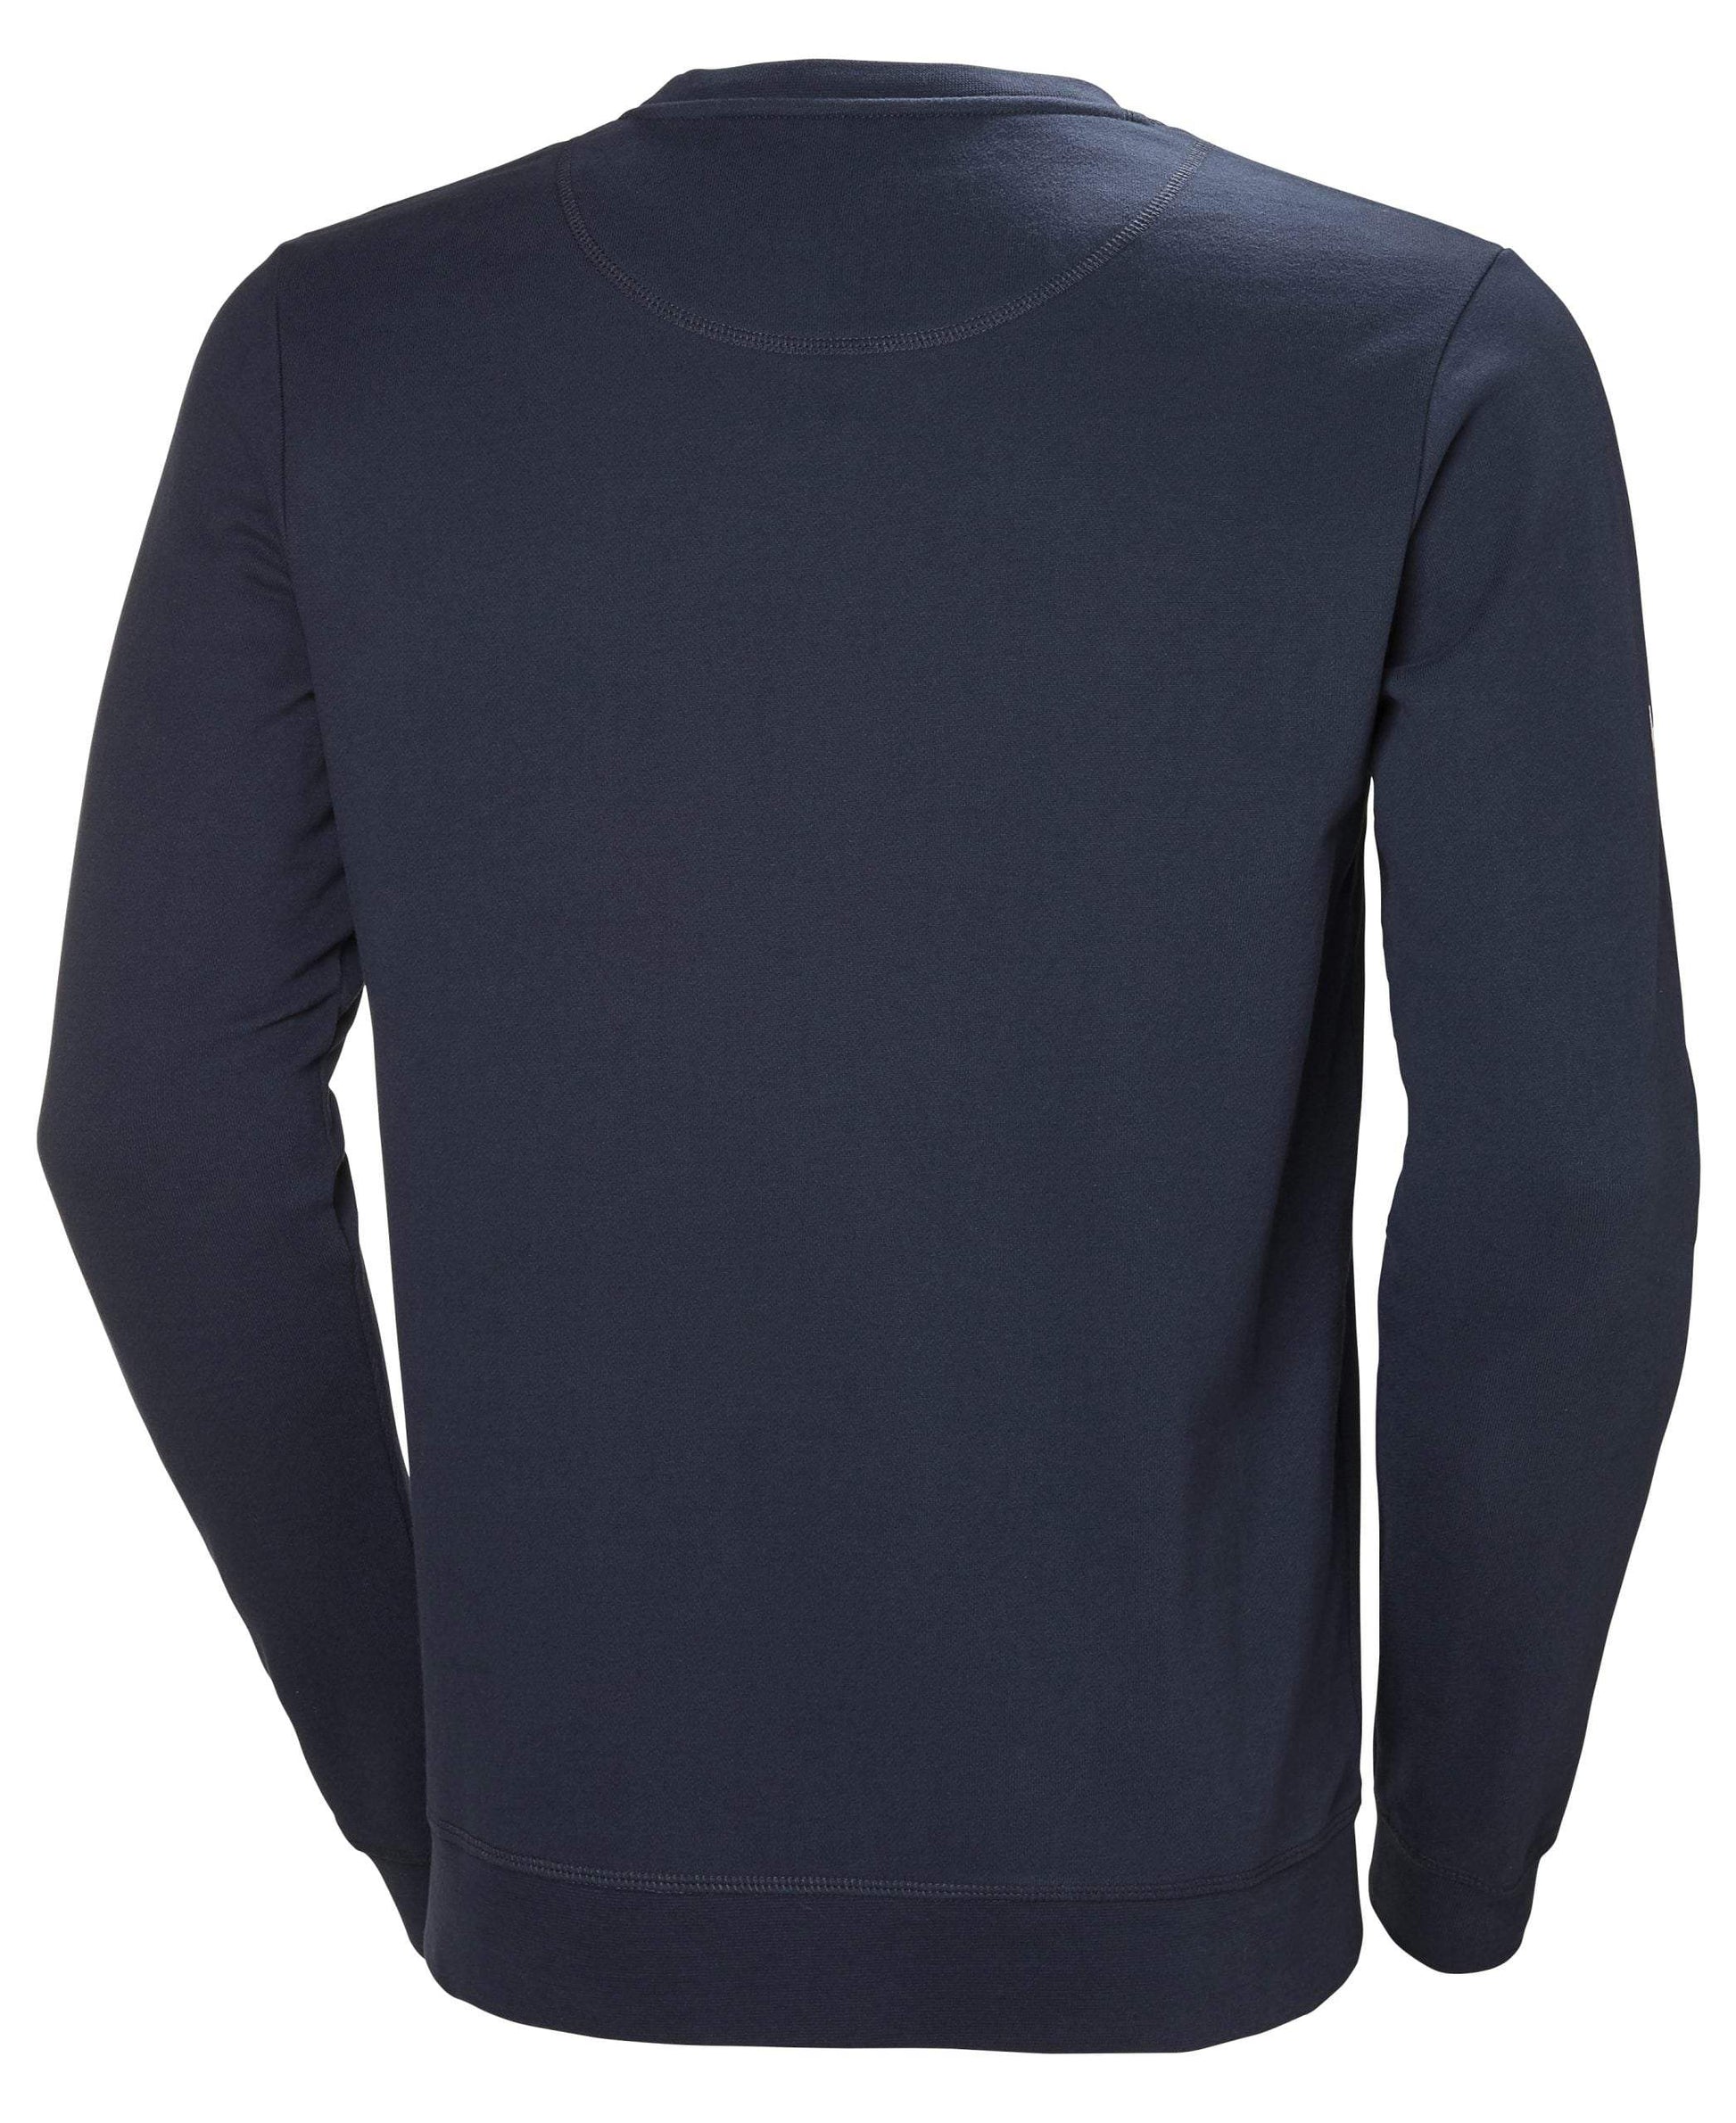 Helly Hansen Men’s Crew Sweatshirt - The Luxury Promotional Gifts Company Limited